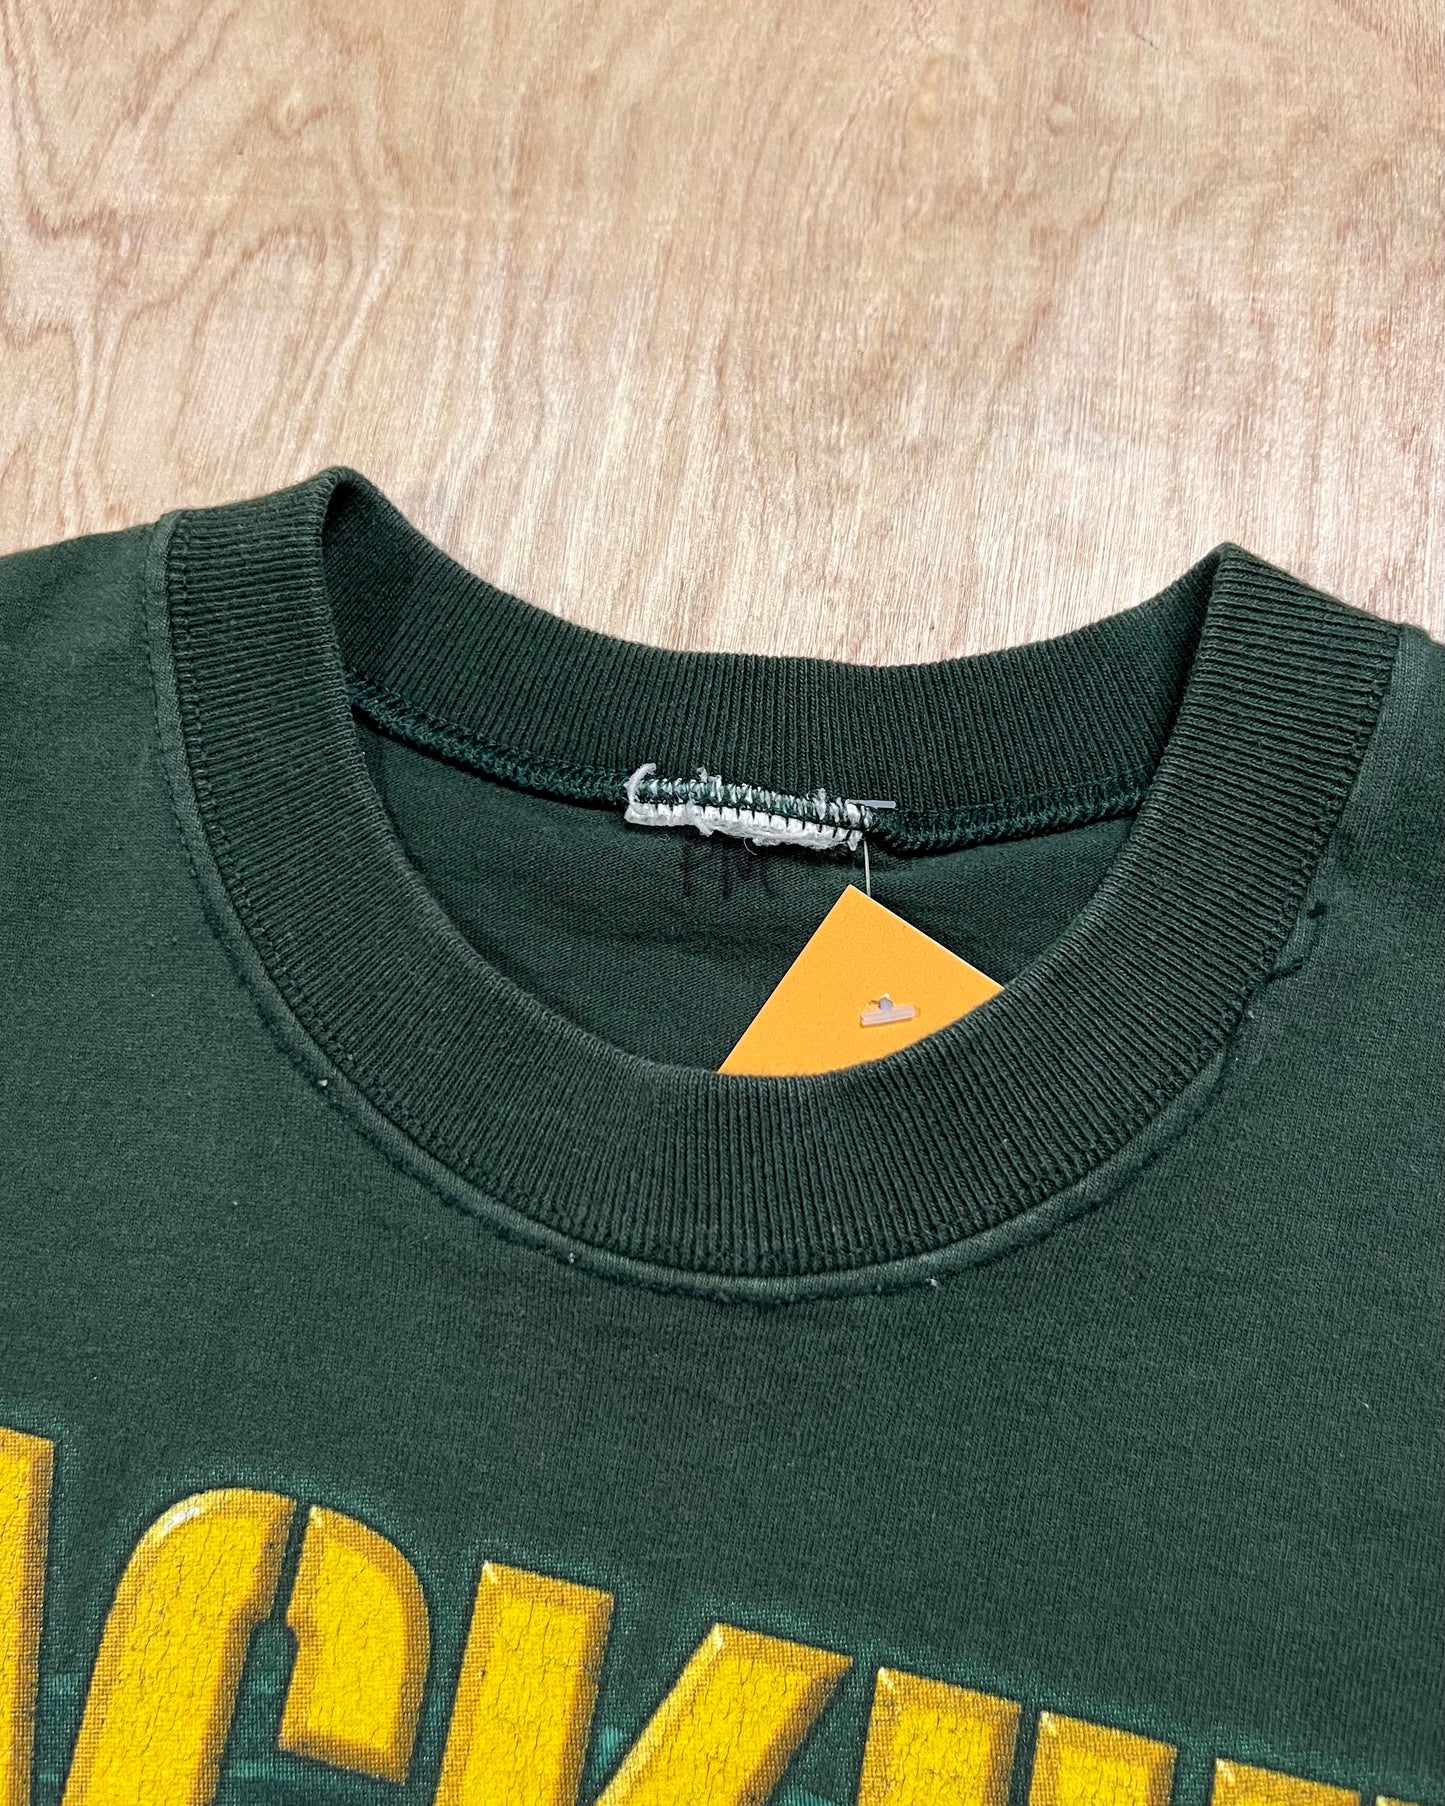 1990's Green Bay Packers Pro Line Graphic T-Shirt